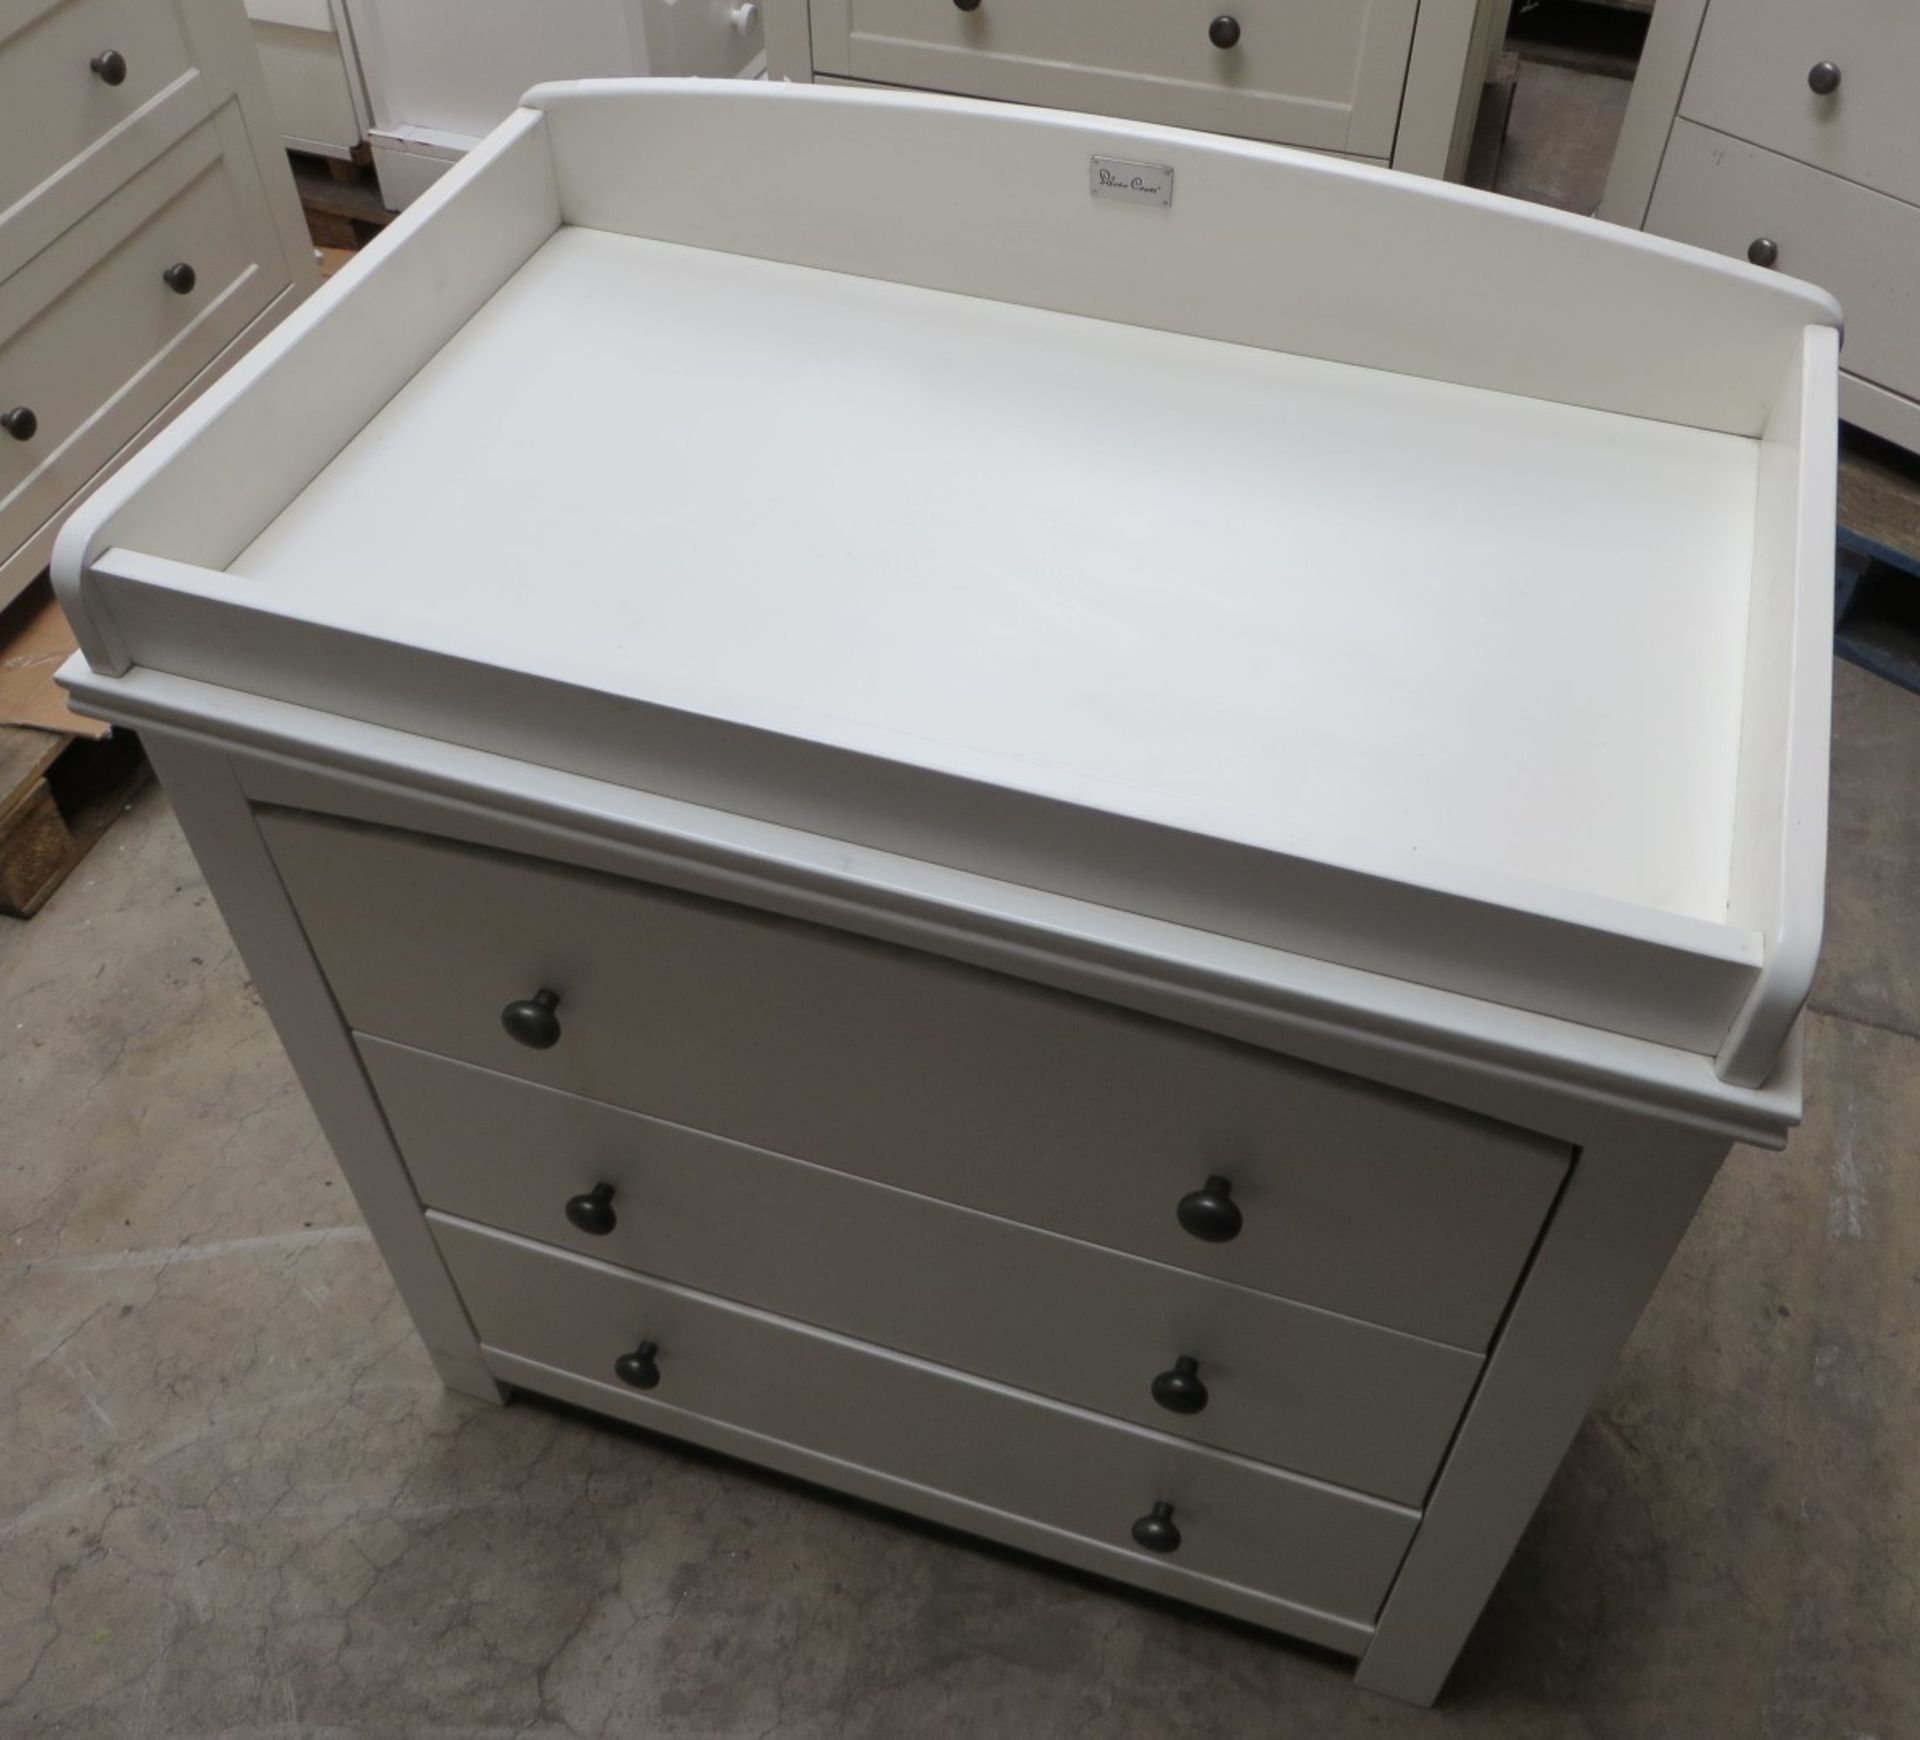 1 x Silver Cross Ashby-Style Combination Changer And Dresser - Nursery Furniture - 88x52x97.5cm - - Image 19 of 19